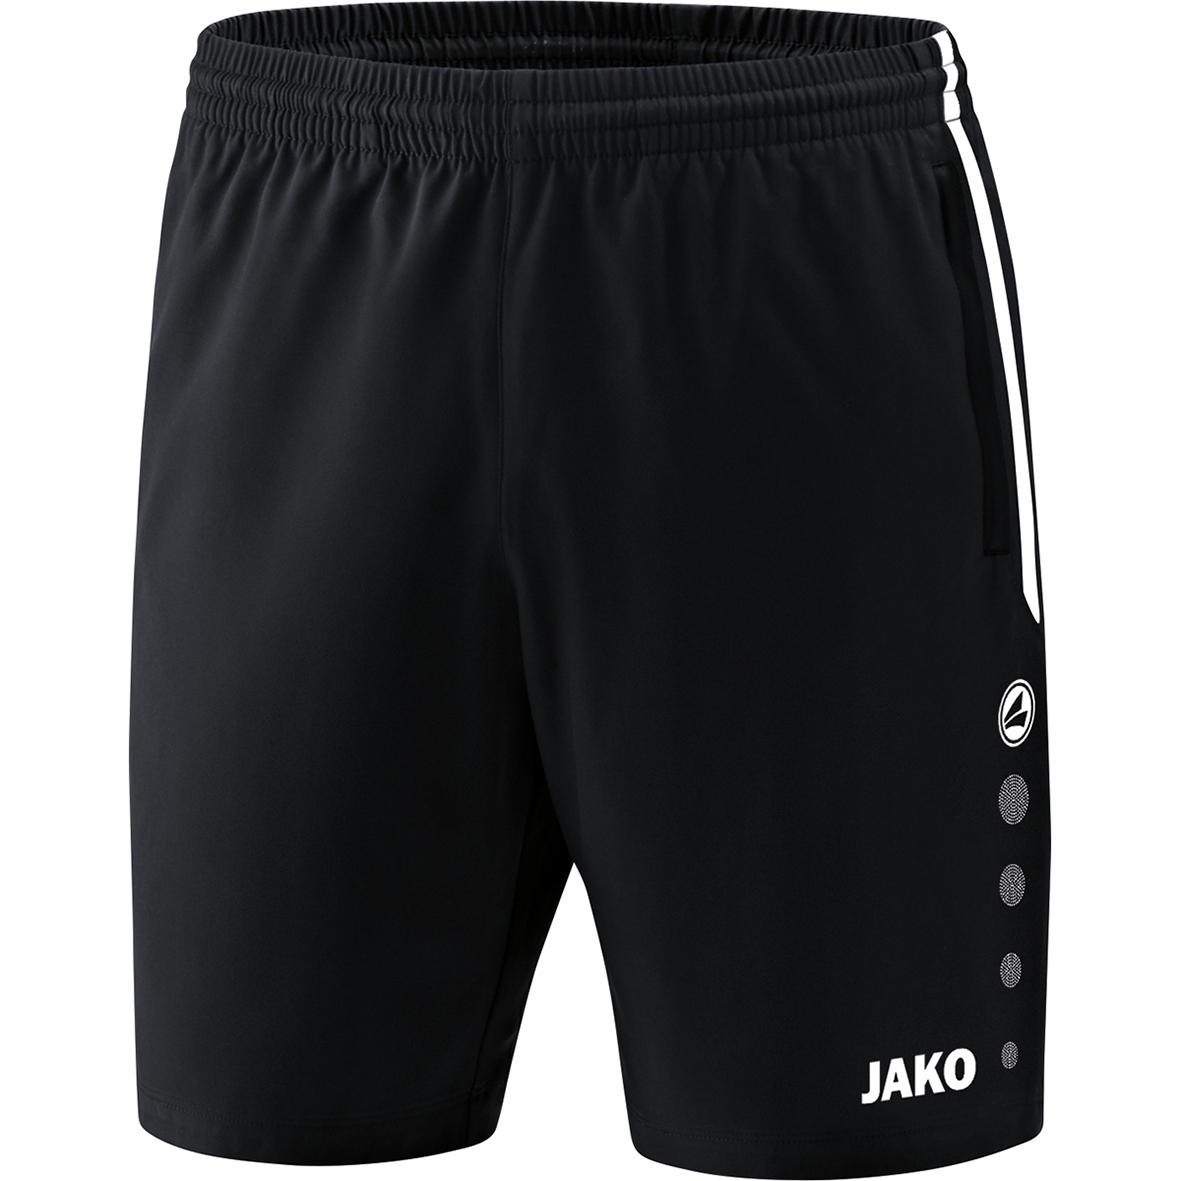 SHORT JAKO COMPETITION 2.0, NEGRO MUJER.